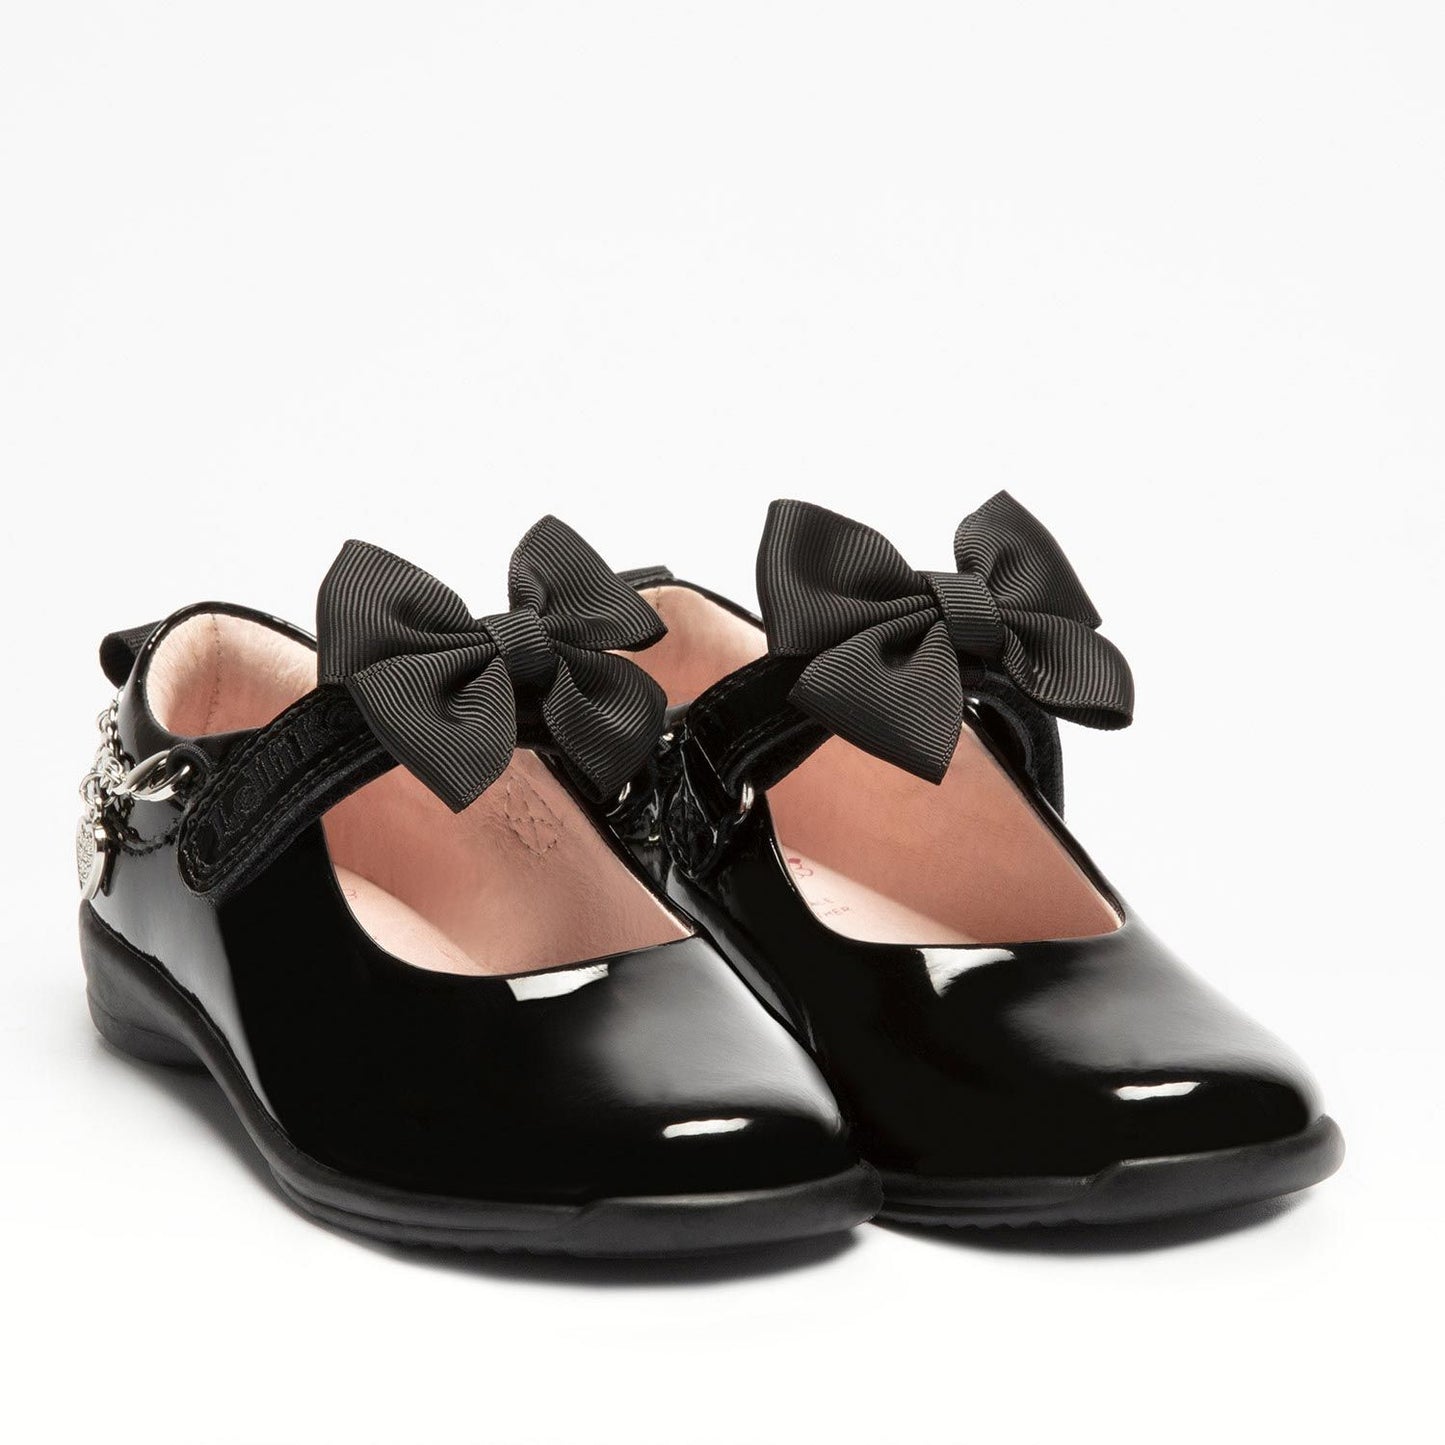 A pair of girls Mary Jane school shoes by Lelli Kelly, style LK8219 Jewel, in black patent leather with velcro fastening and detachable fabric bow and bracelet. Angled view.